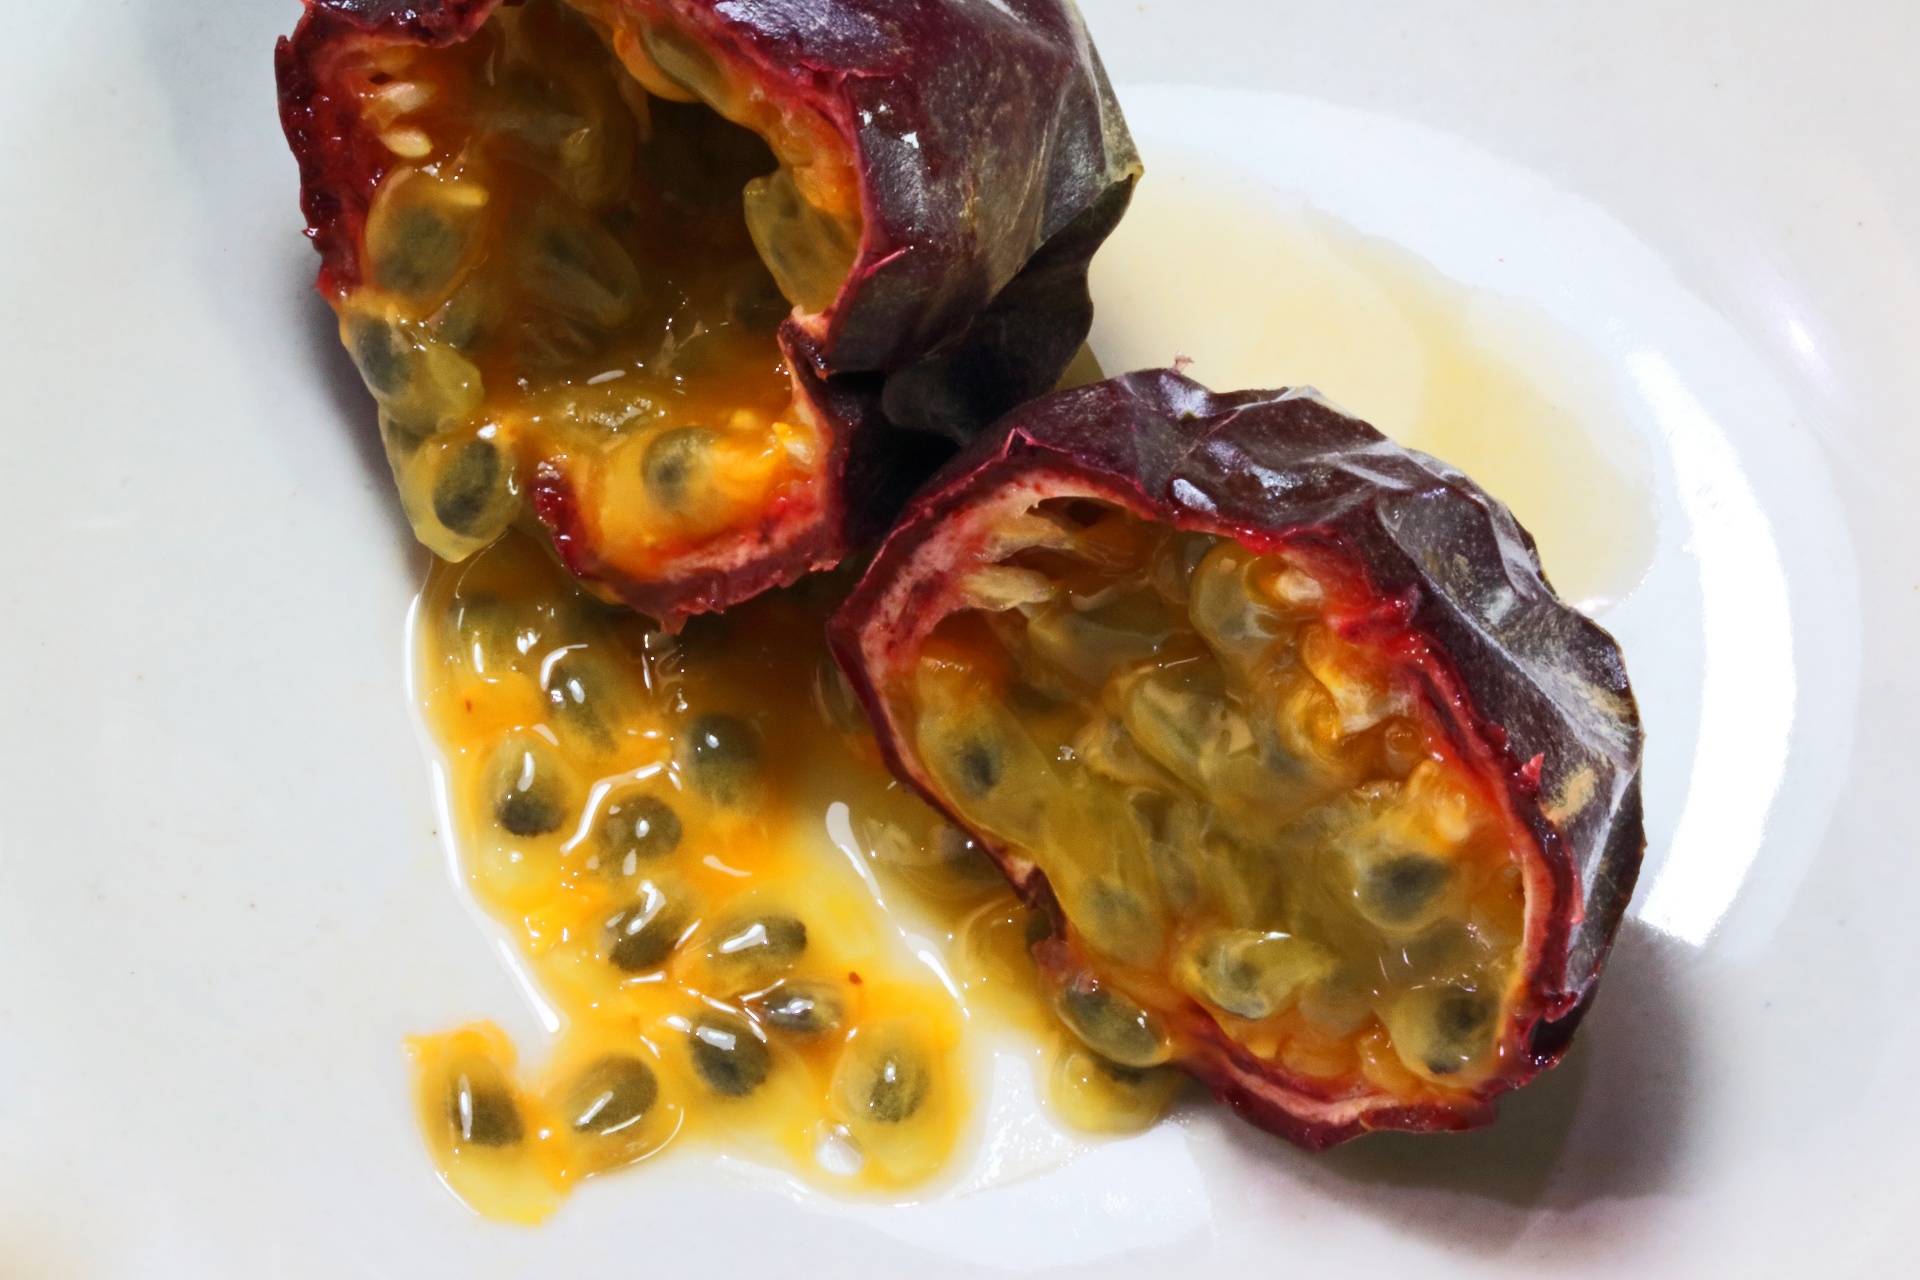 juicy pulp of passion fruit from a cut fruit